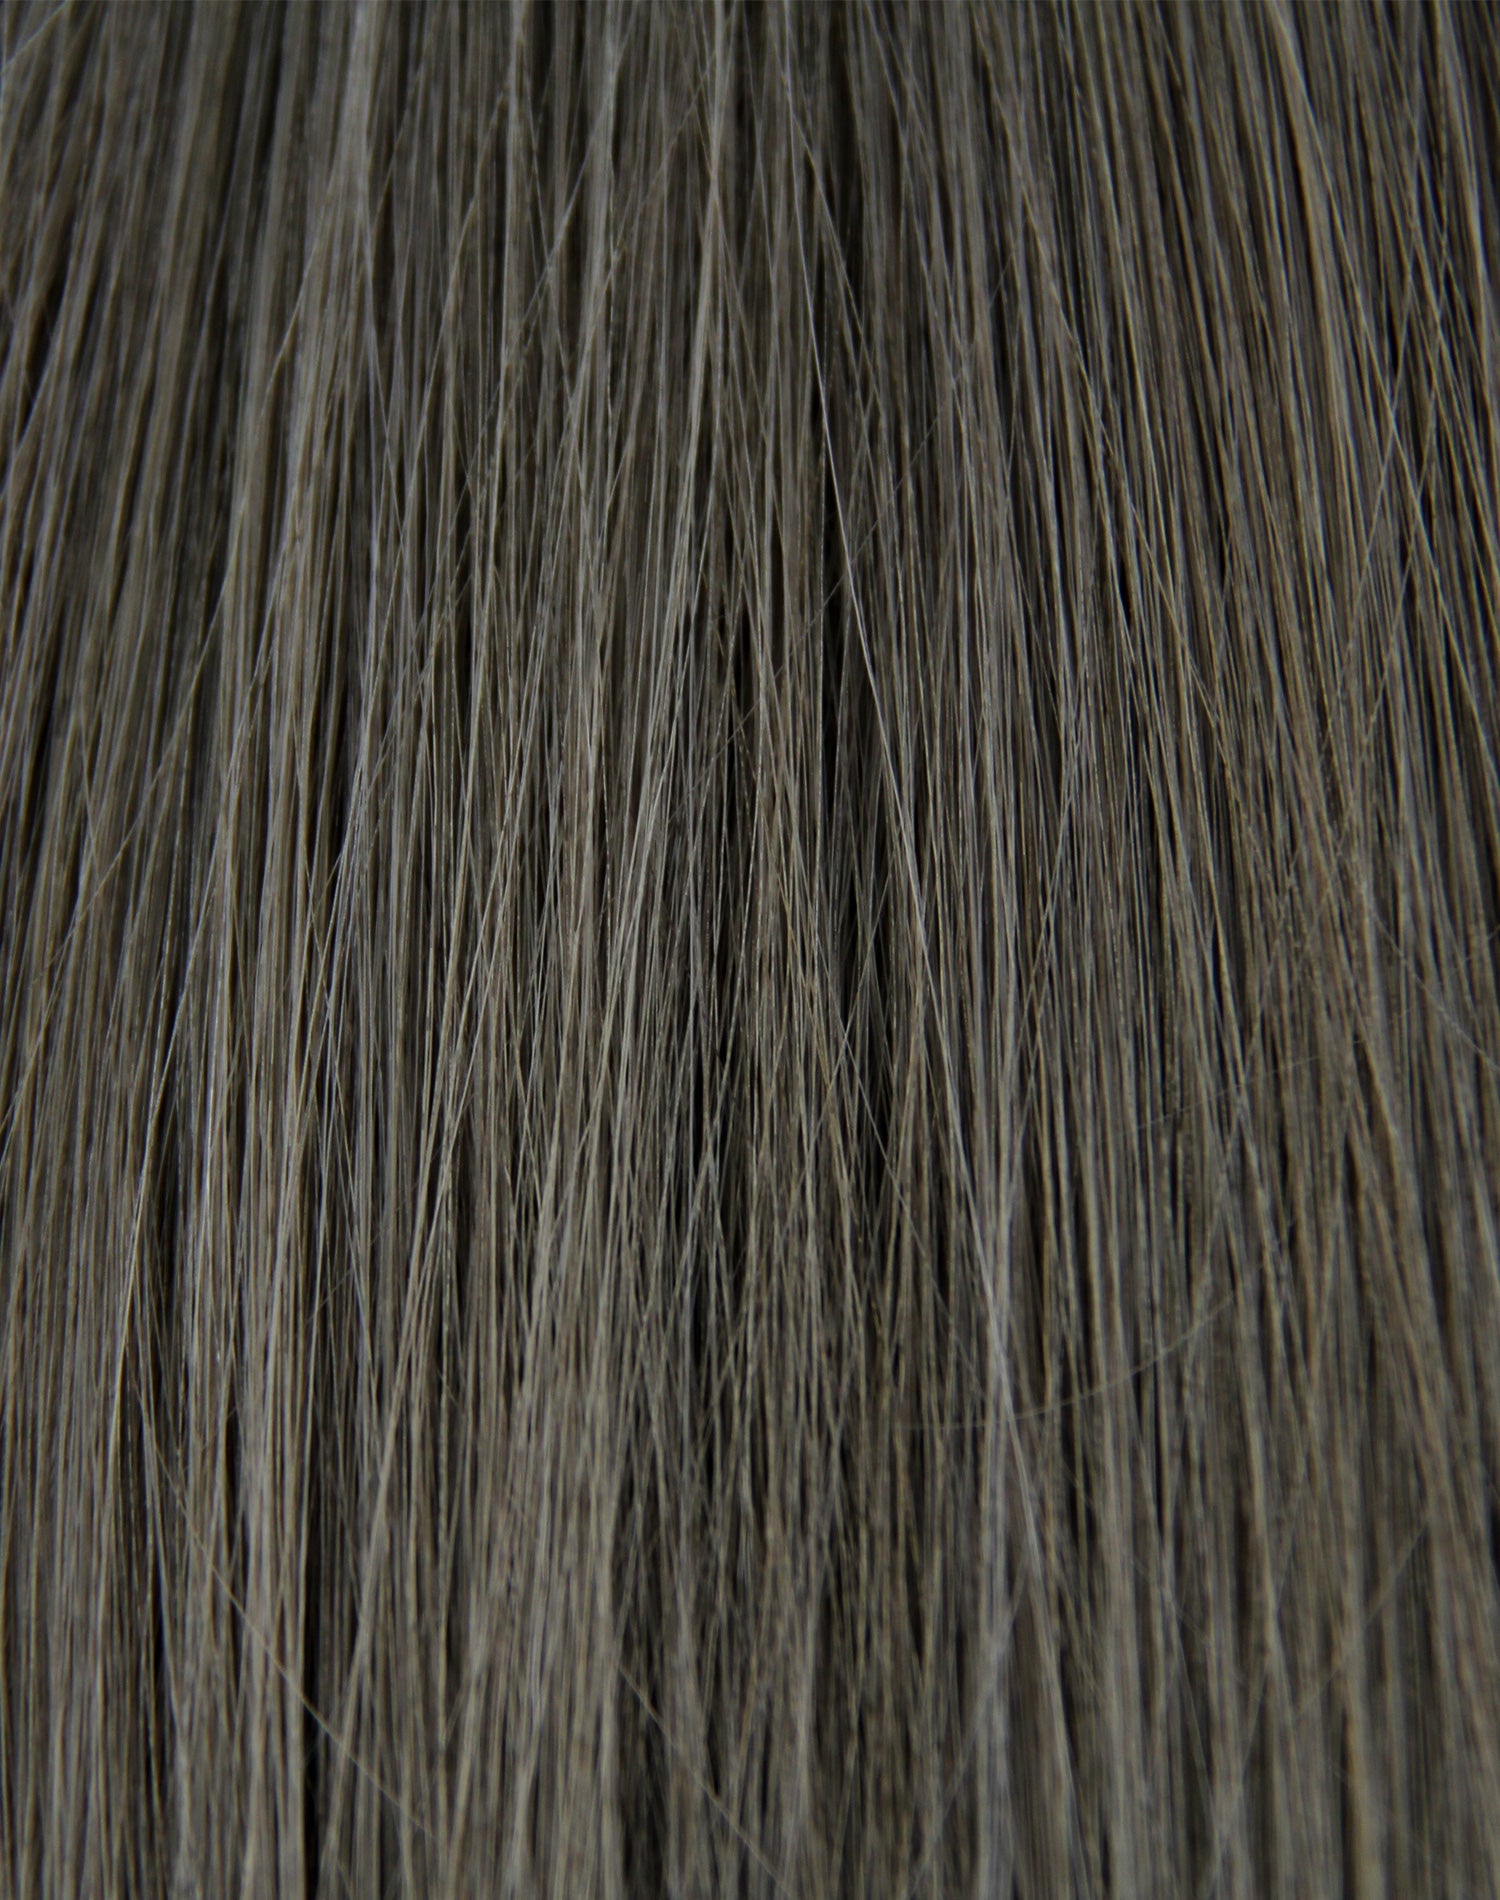 Bombshell Invisible Weft - 55cm - Miss know it all